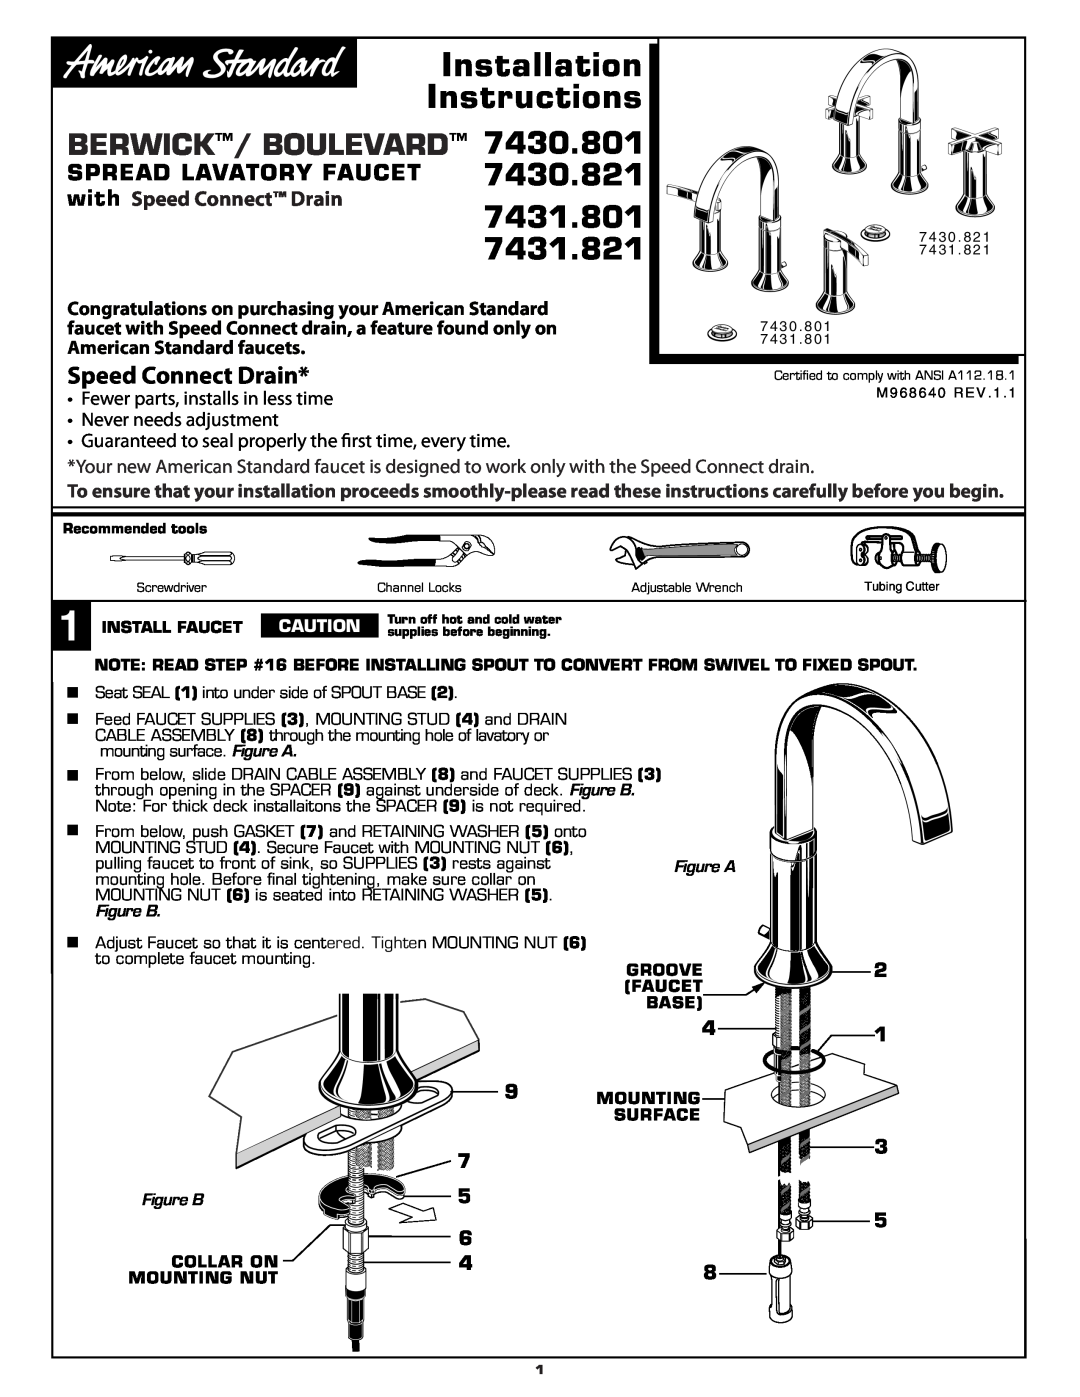 American Standard 7431.801 installation instructions Spread Lavatory Faucet, with Speed Connect Drain, Install Faucet 